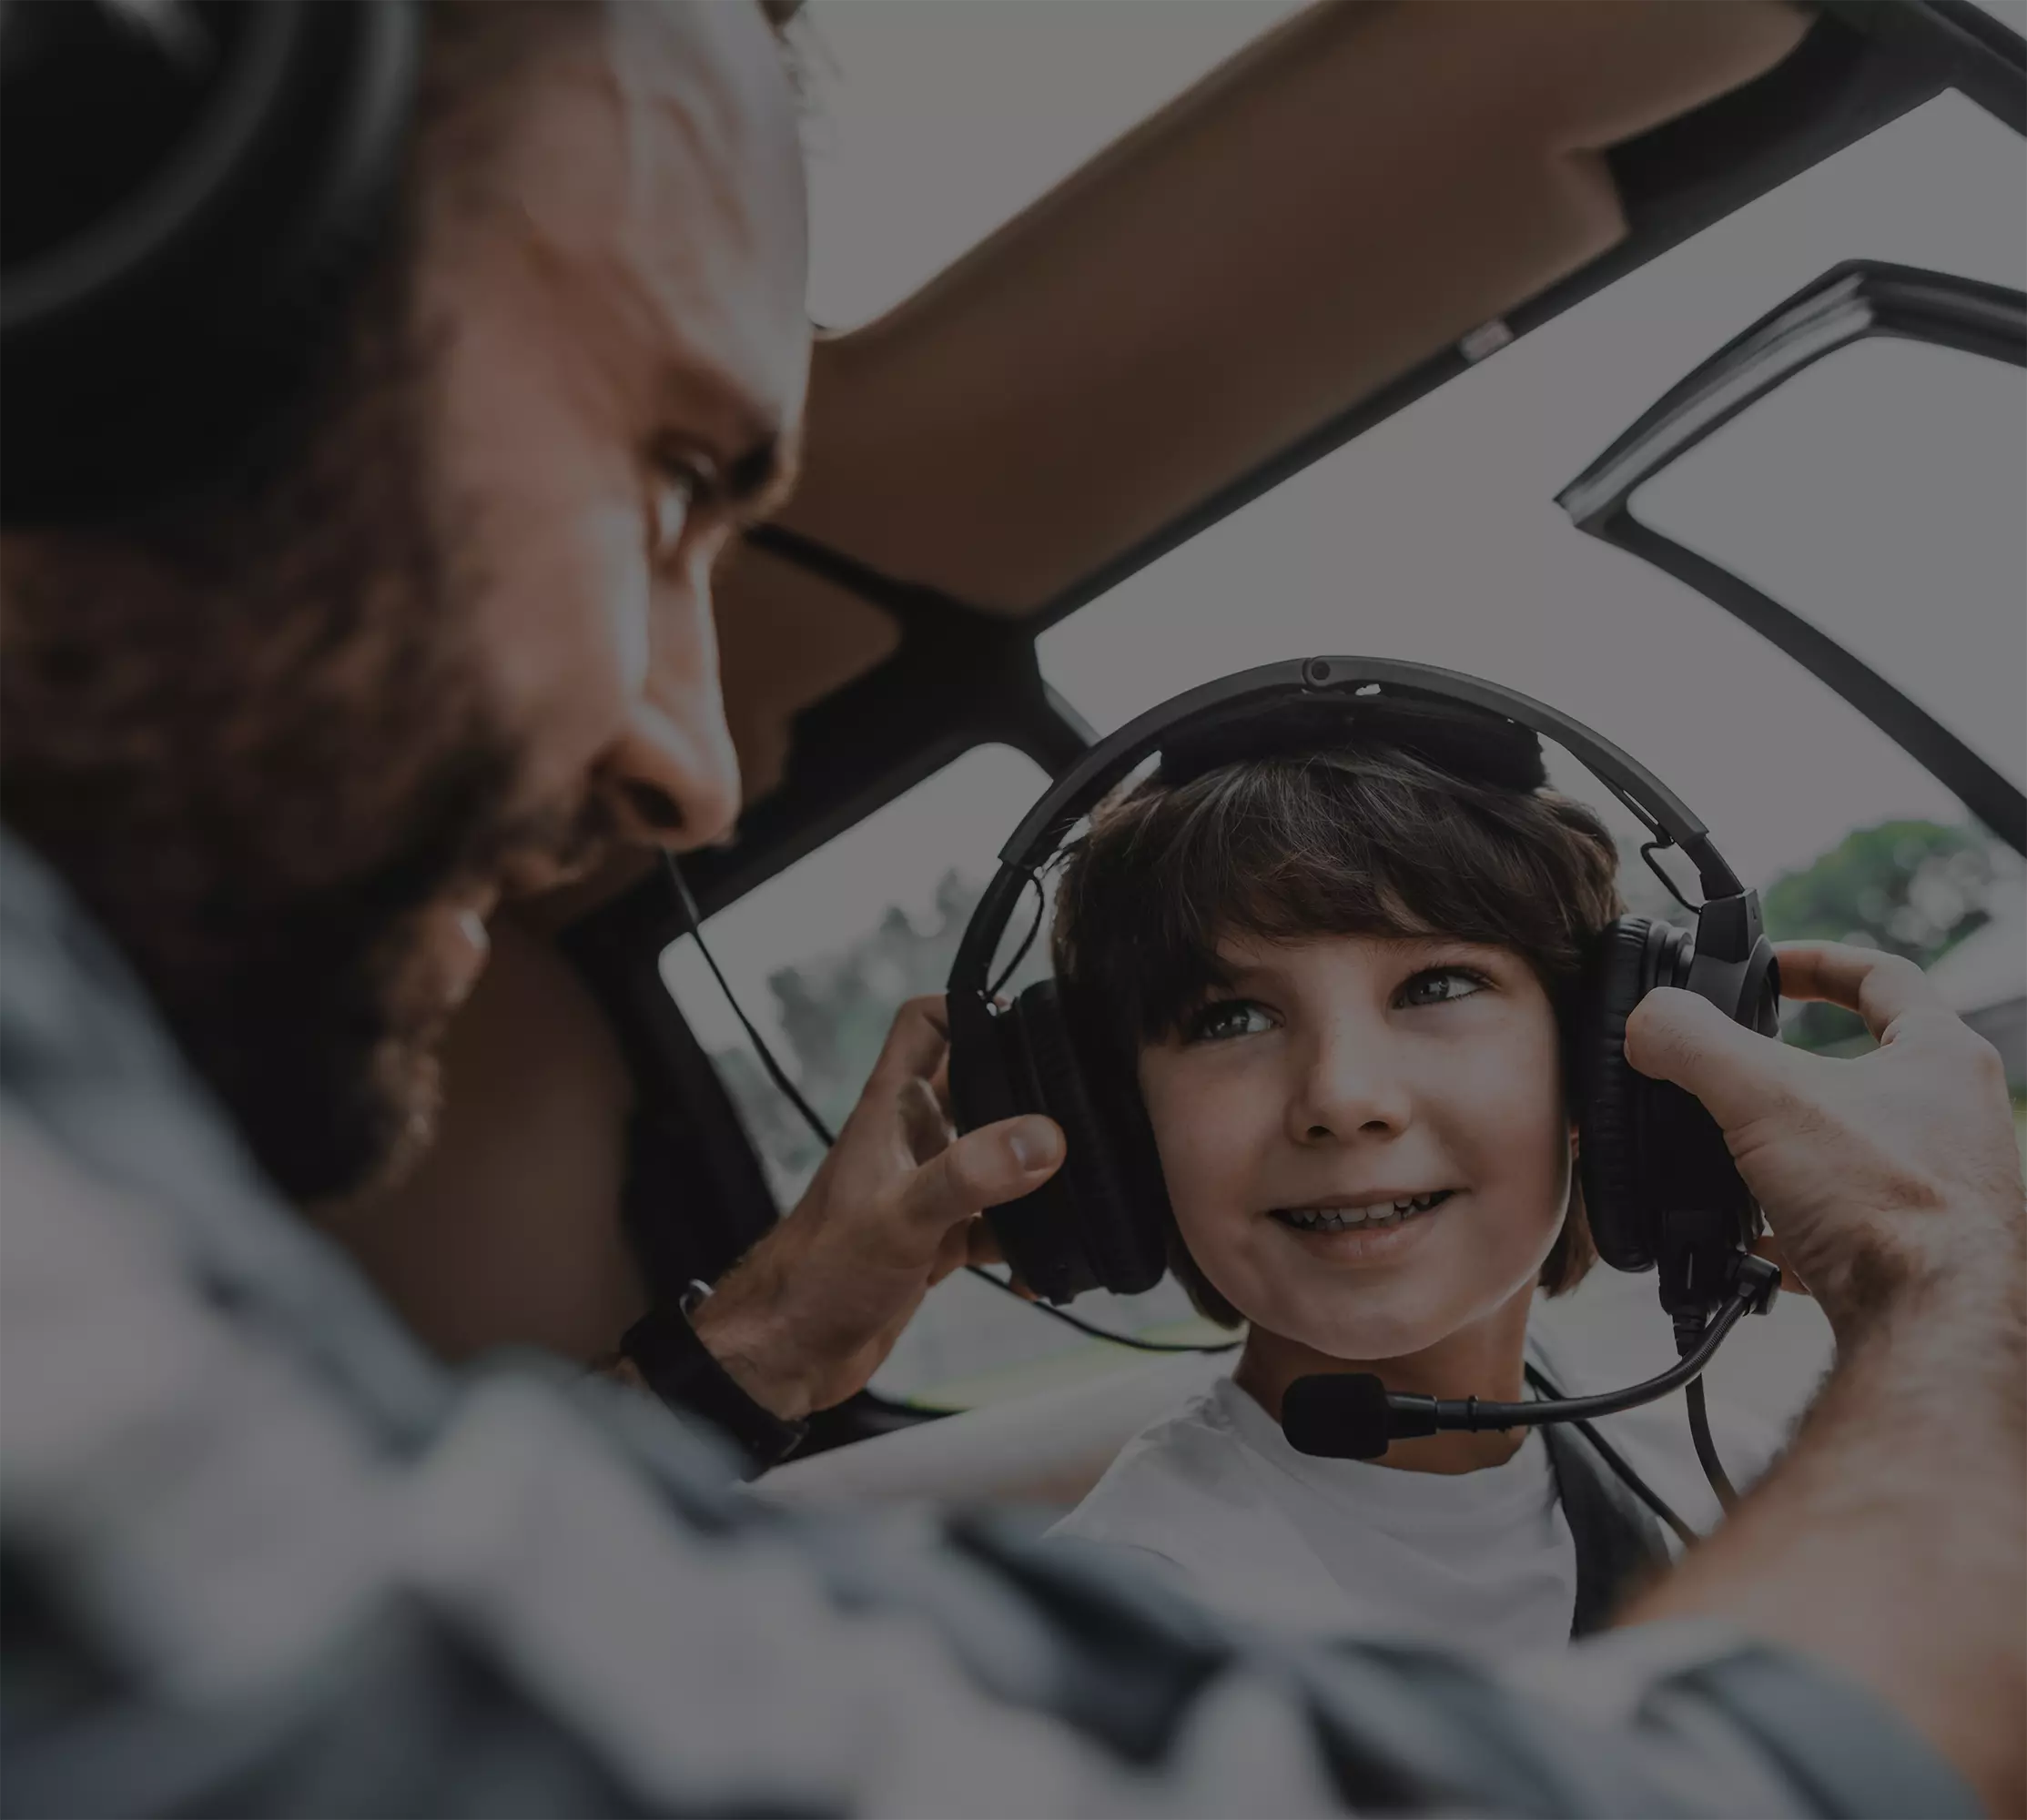 man putting headphones on child in a helicopter